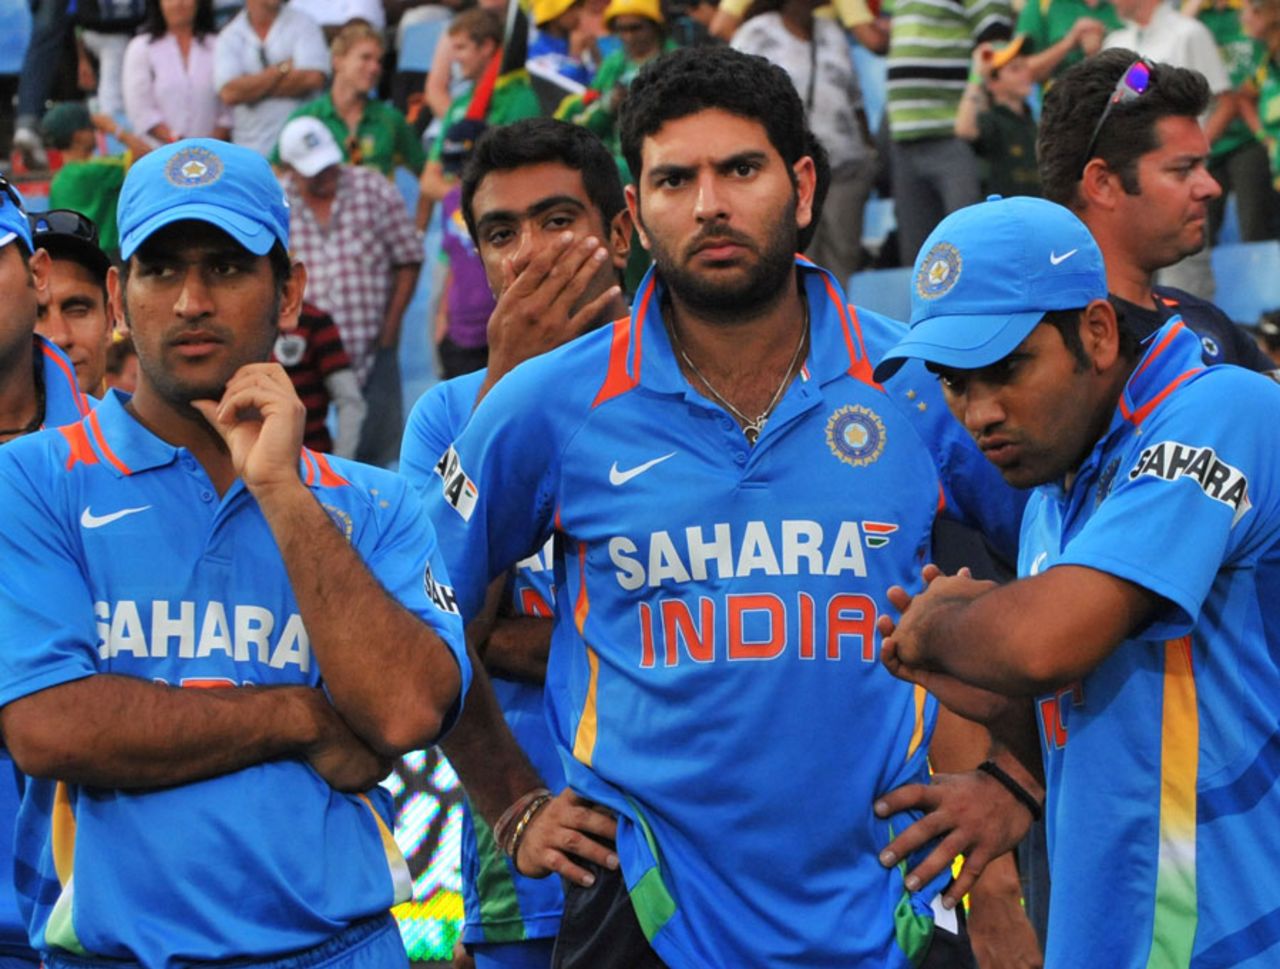 MS Dhoni, Yuvraj Singh, R Ashwin and Rohit Sharma at the post-match presentation after India lost the series, South Africa v India, 5th ODI, Centurion, January 23, 2011